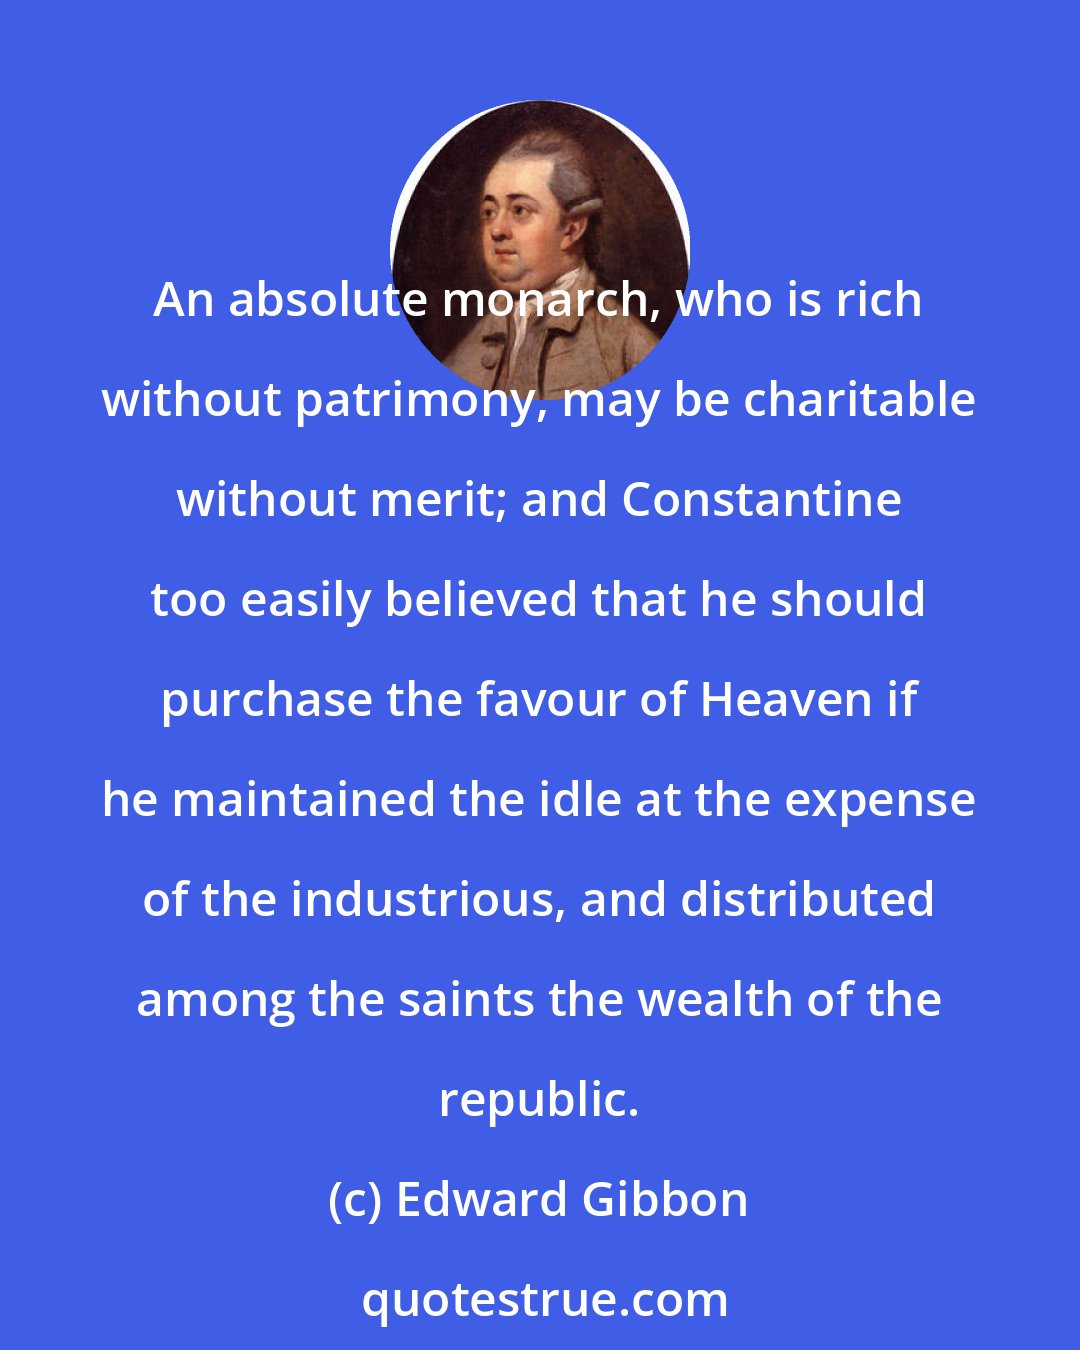 Edward Gibbon: An absolute monarch, who is rich without patrimony, may be charitable without merit; and Constantine too easily believed that he should purchase the favour of Heaven if he maintained the idle at the expense of the industrious, and distributed among the saints the wealth of the republic.